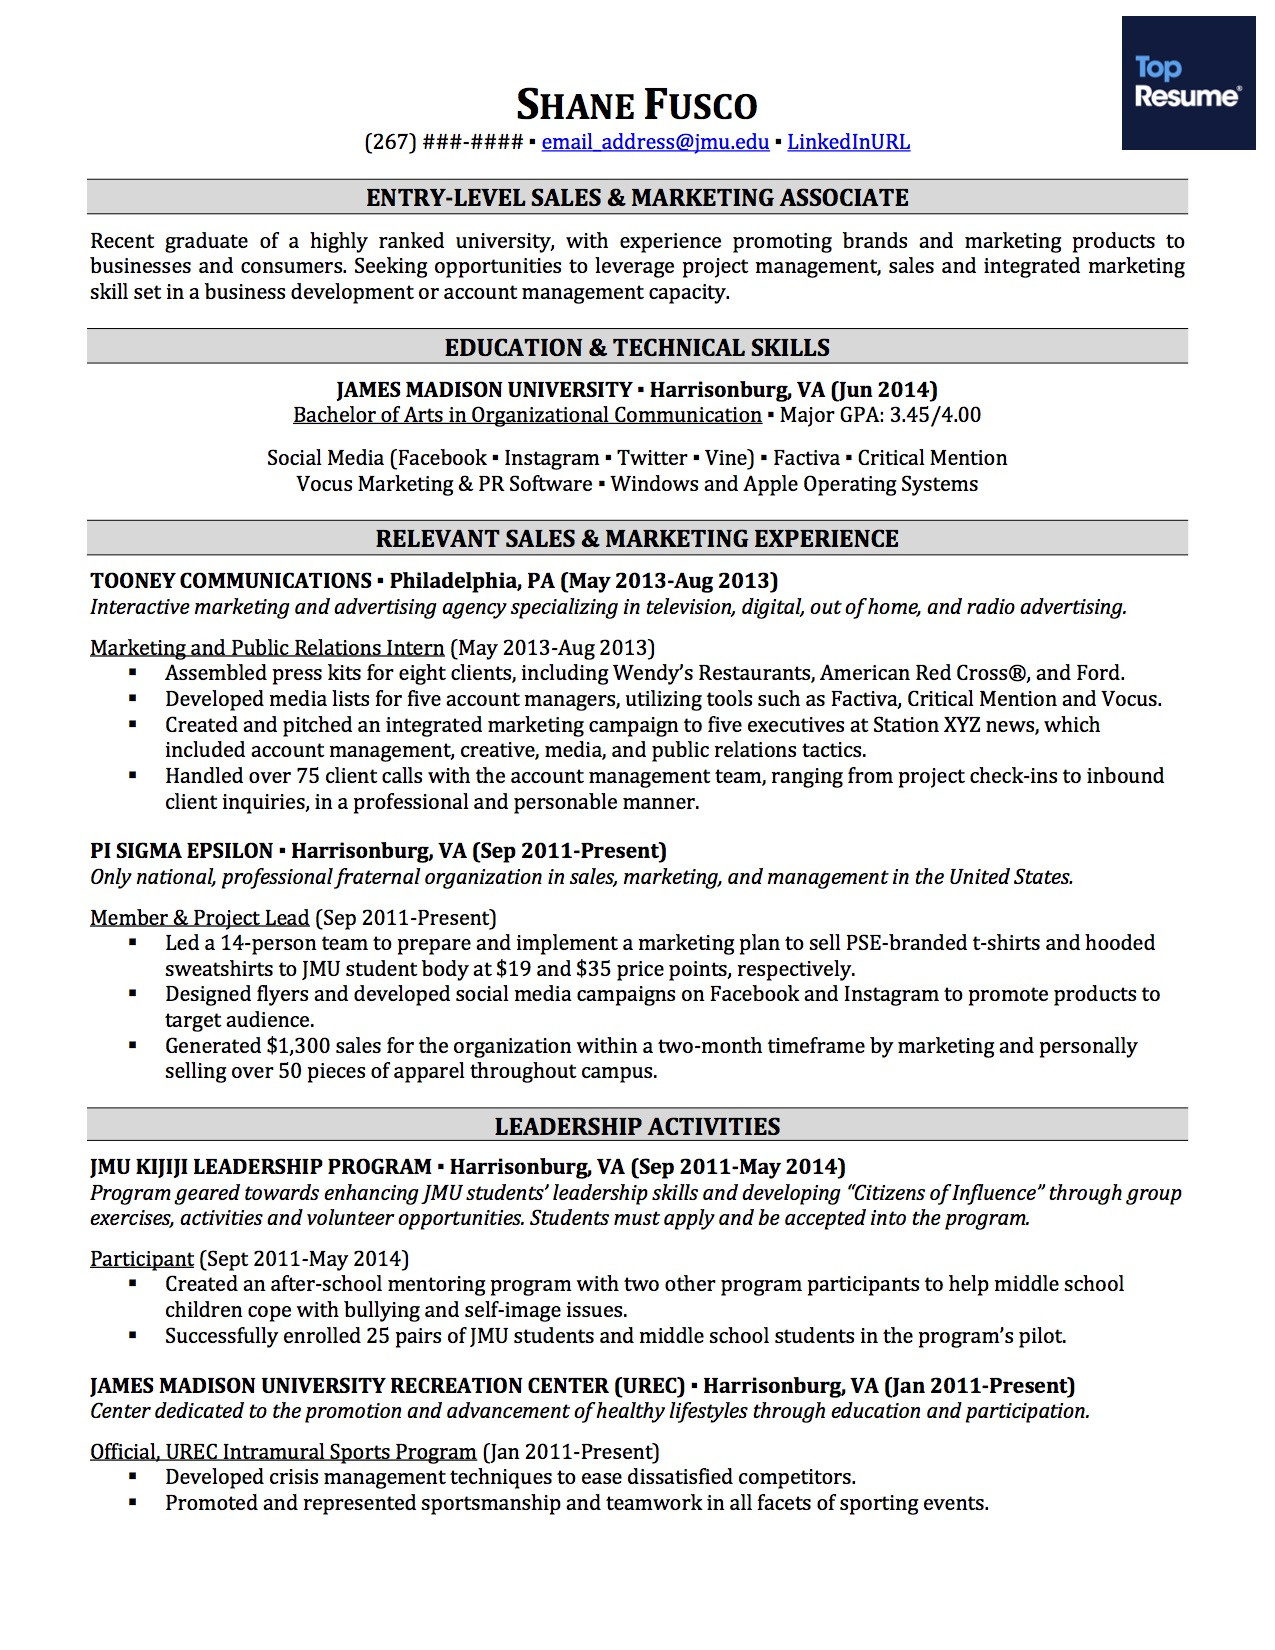 Sample Resume for A Person with No Experience How to Make A Great Resume with No Experience topresume